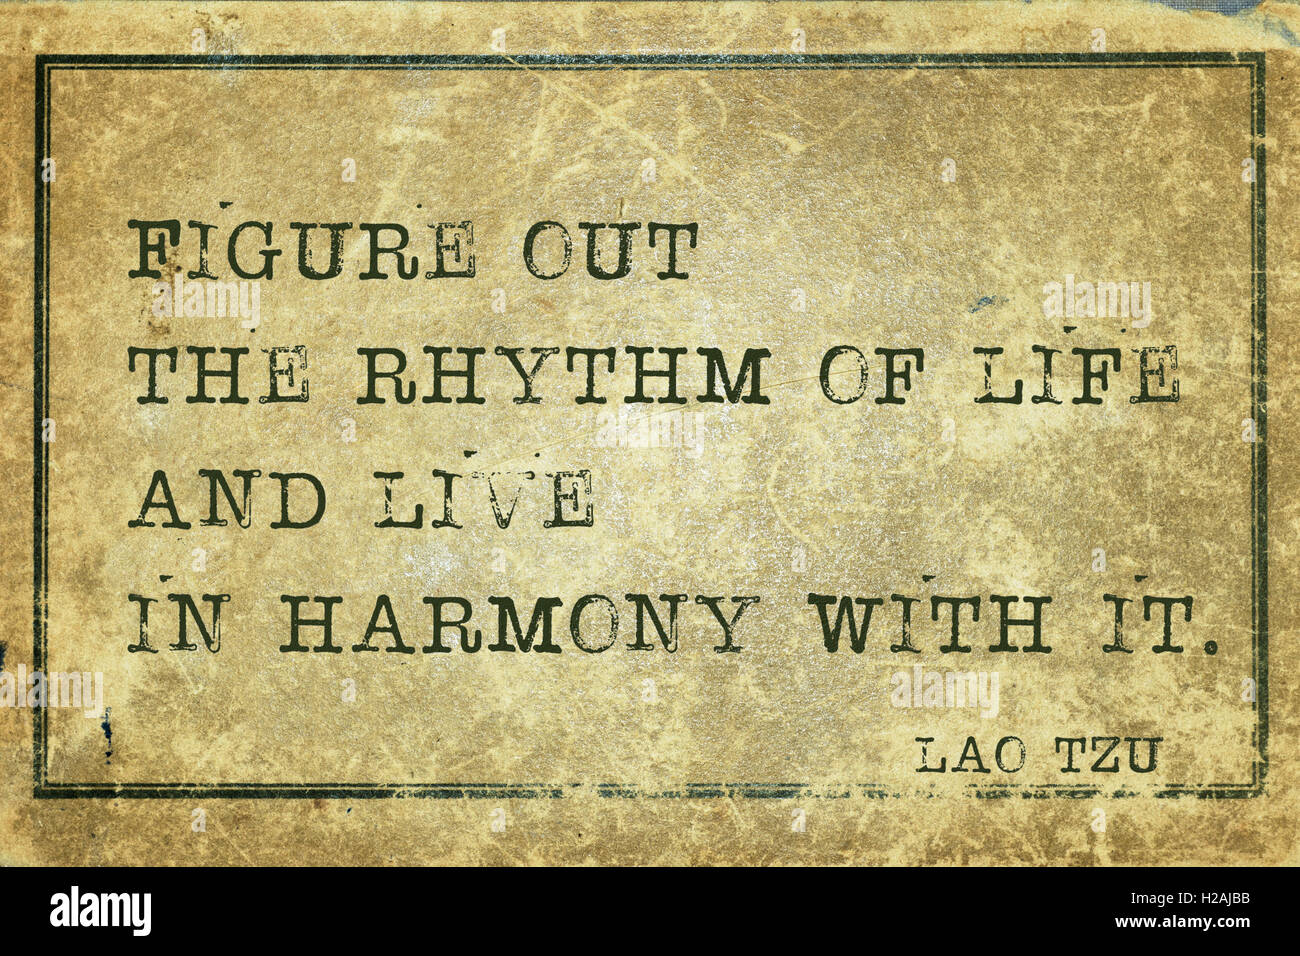 Figure out the rhythm of life - ancient Chinese philosopher Lao Tzu quote printed on grunge vintage cardboard Stock Photo